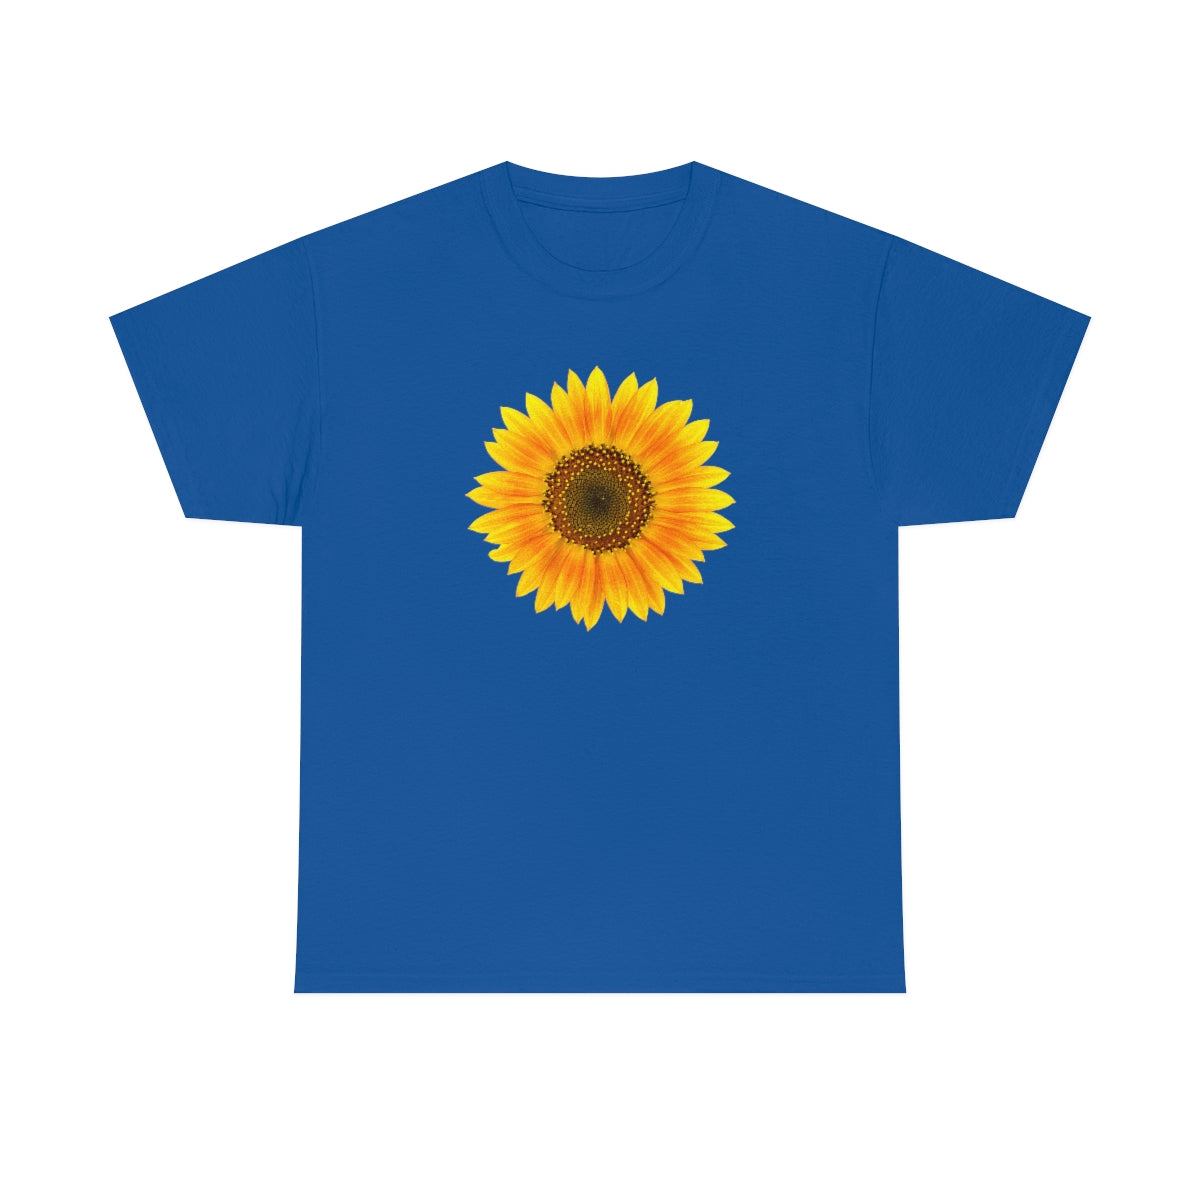 Flat front view of the Royal Blue t-shirt